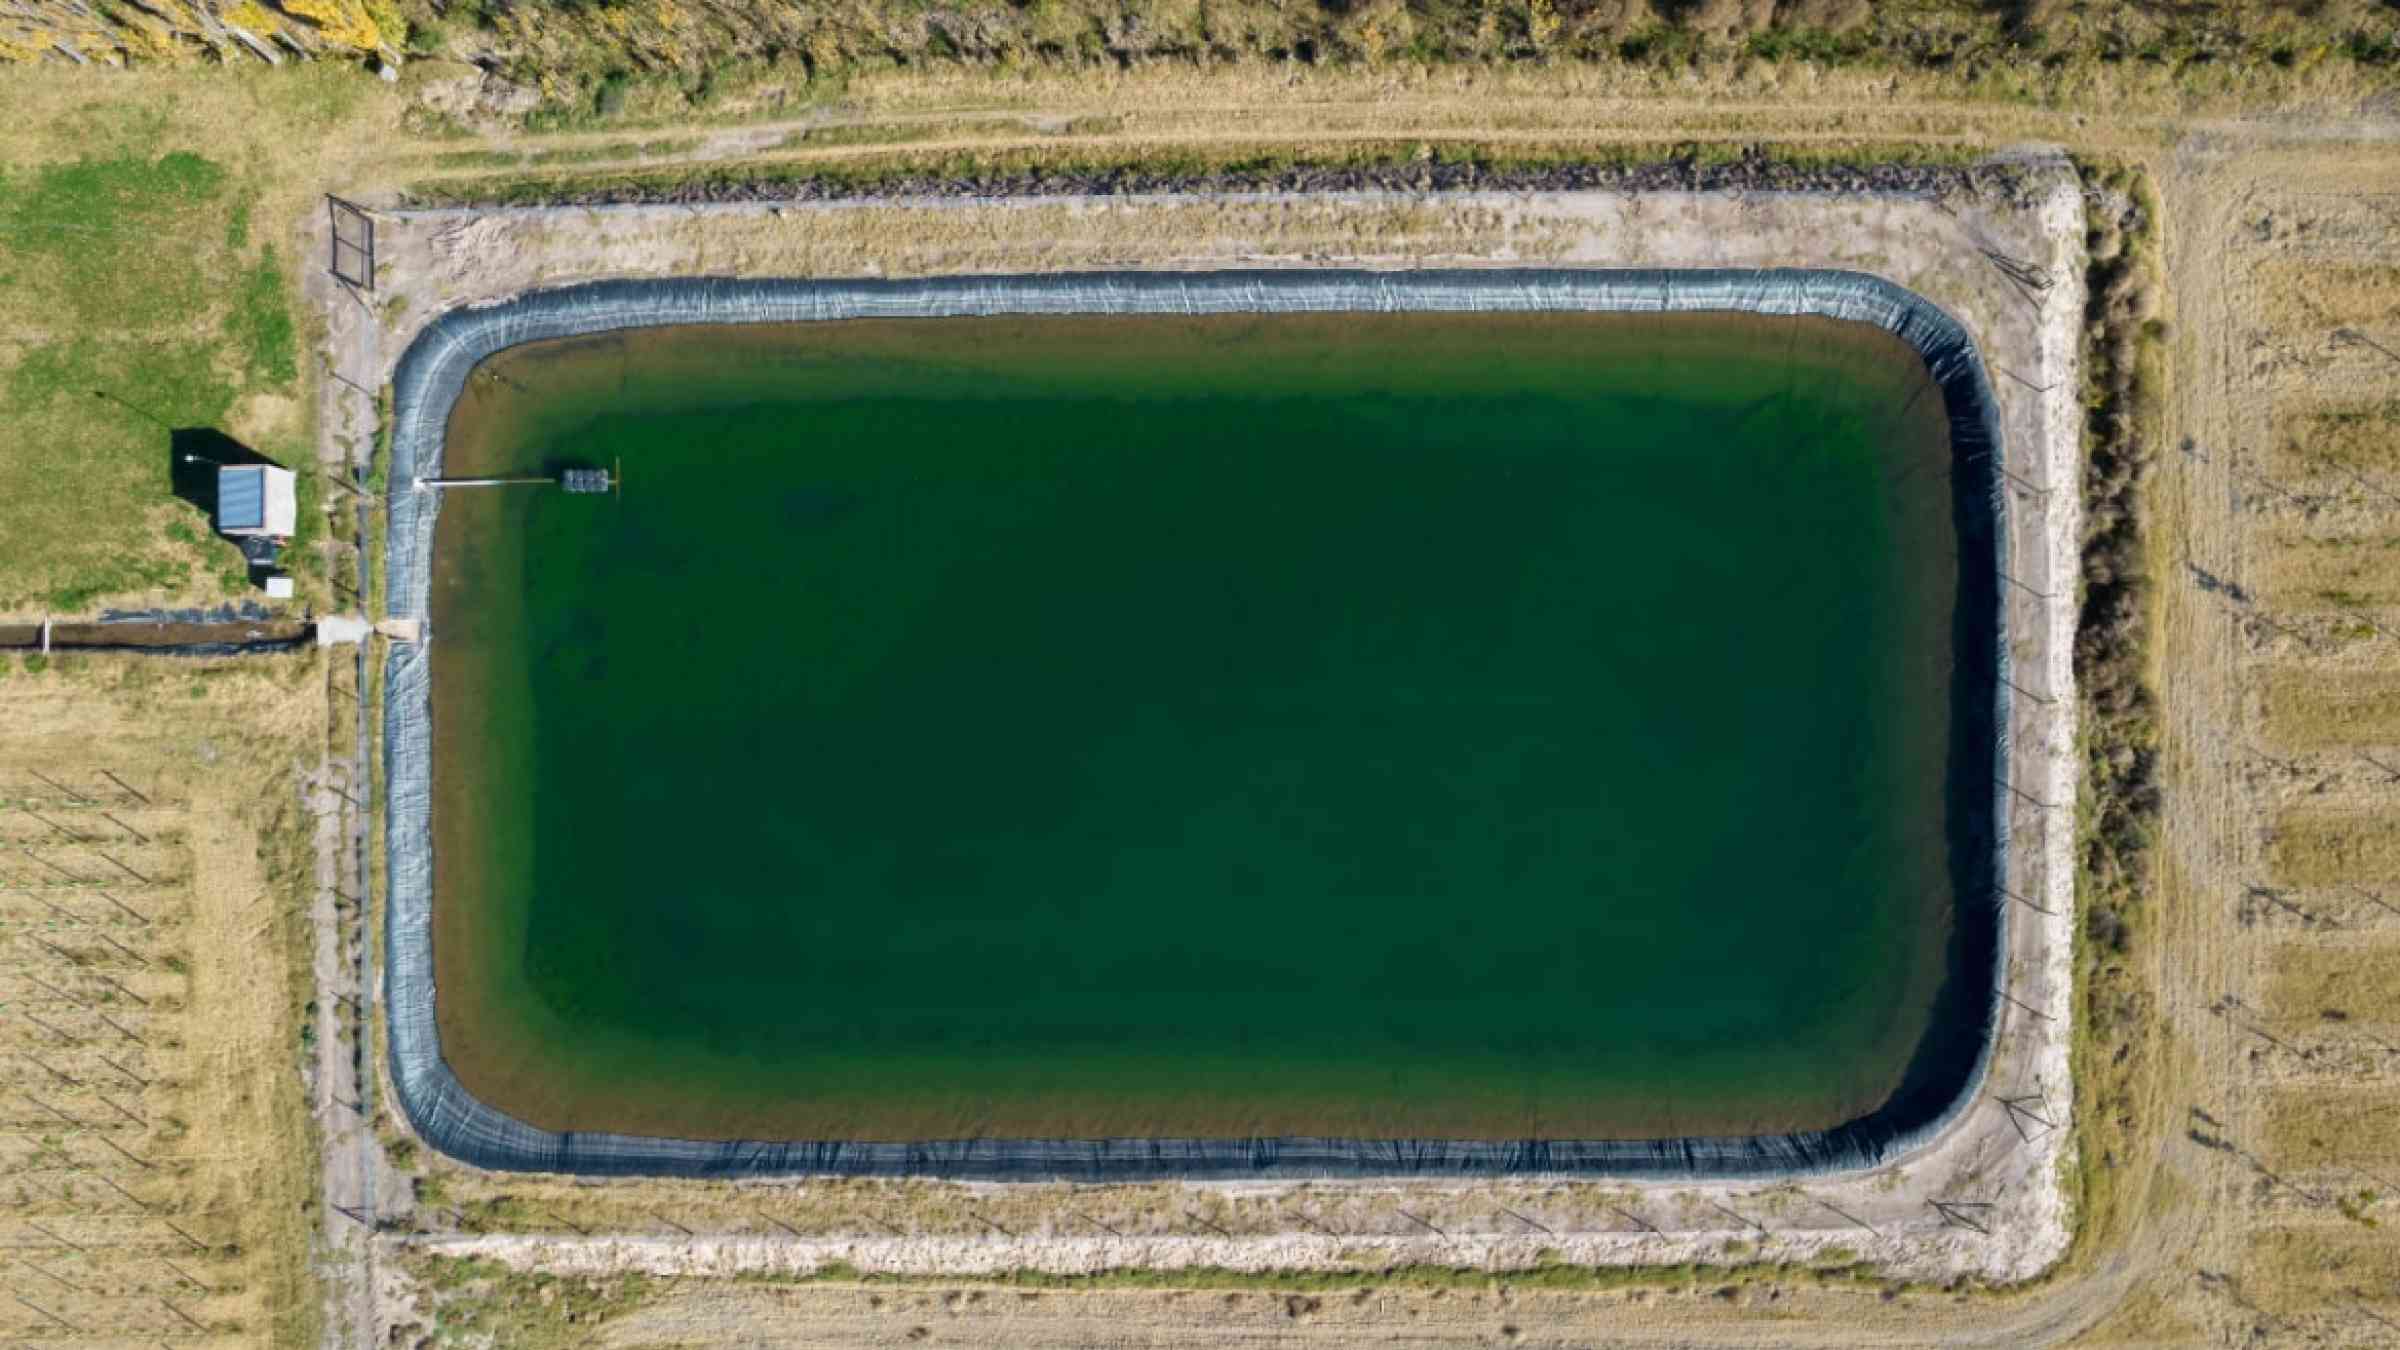 Aerial picture of a basin in an agricultural field